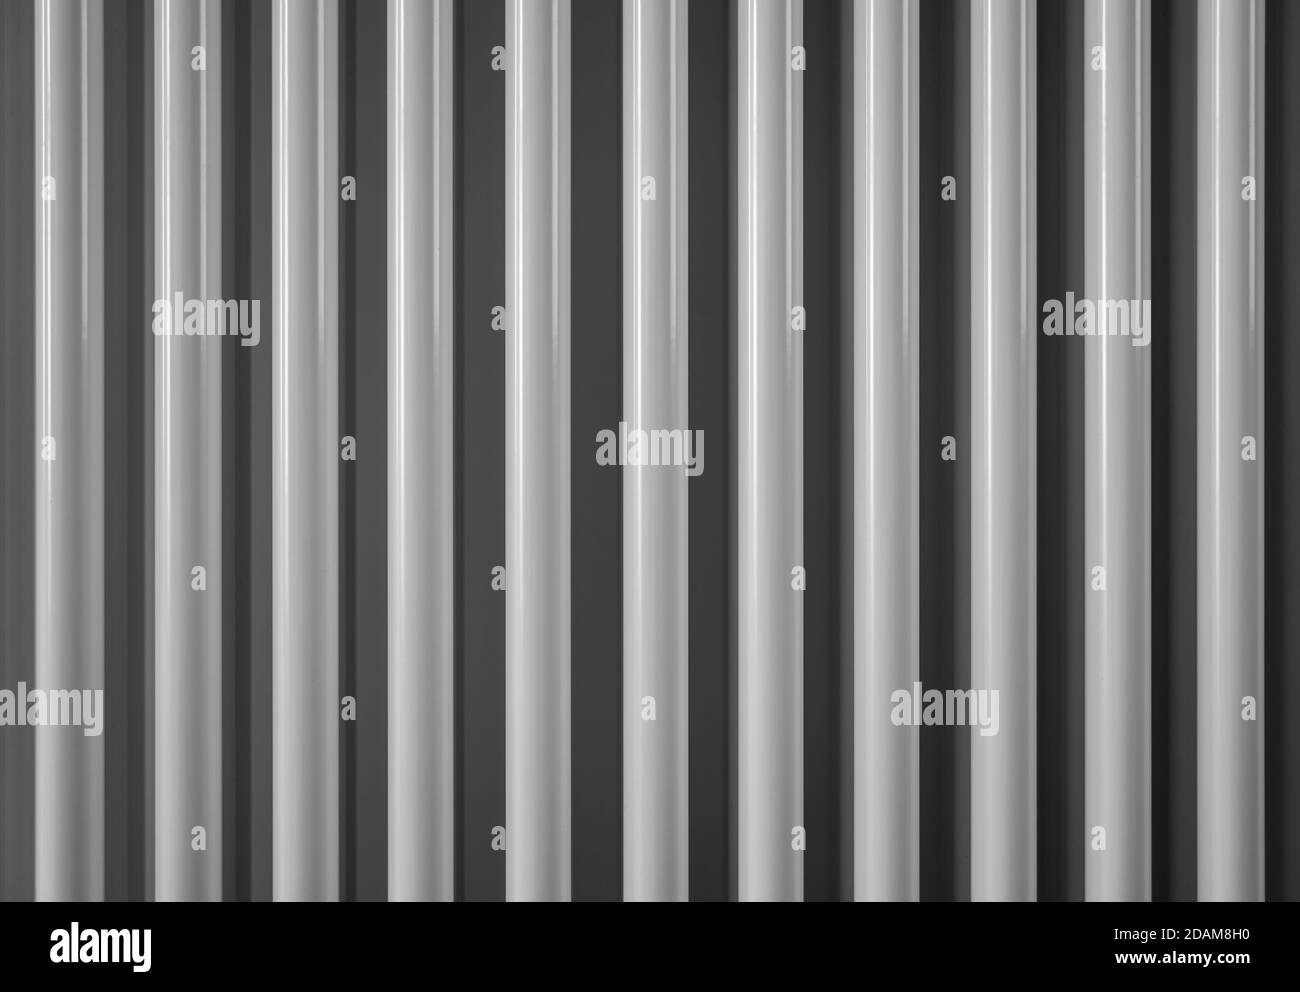 Black and white abstract image of a radiator tubes. Front view Stock Photo